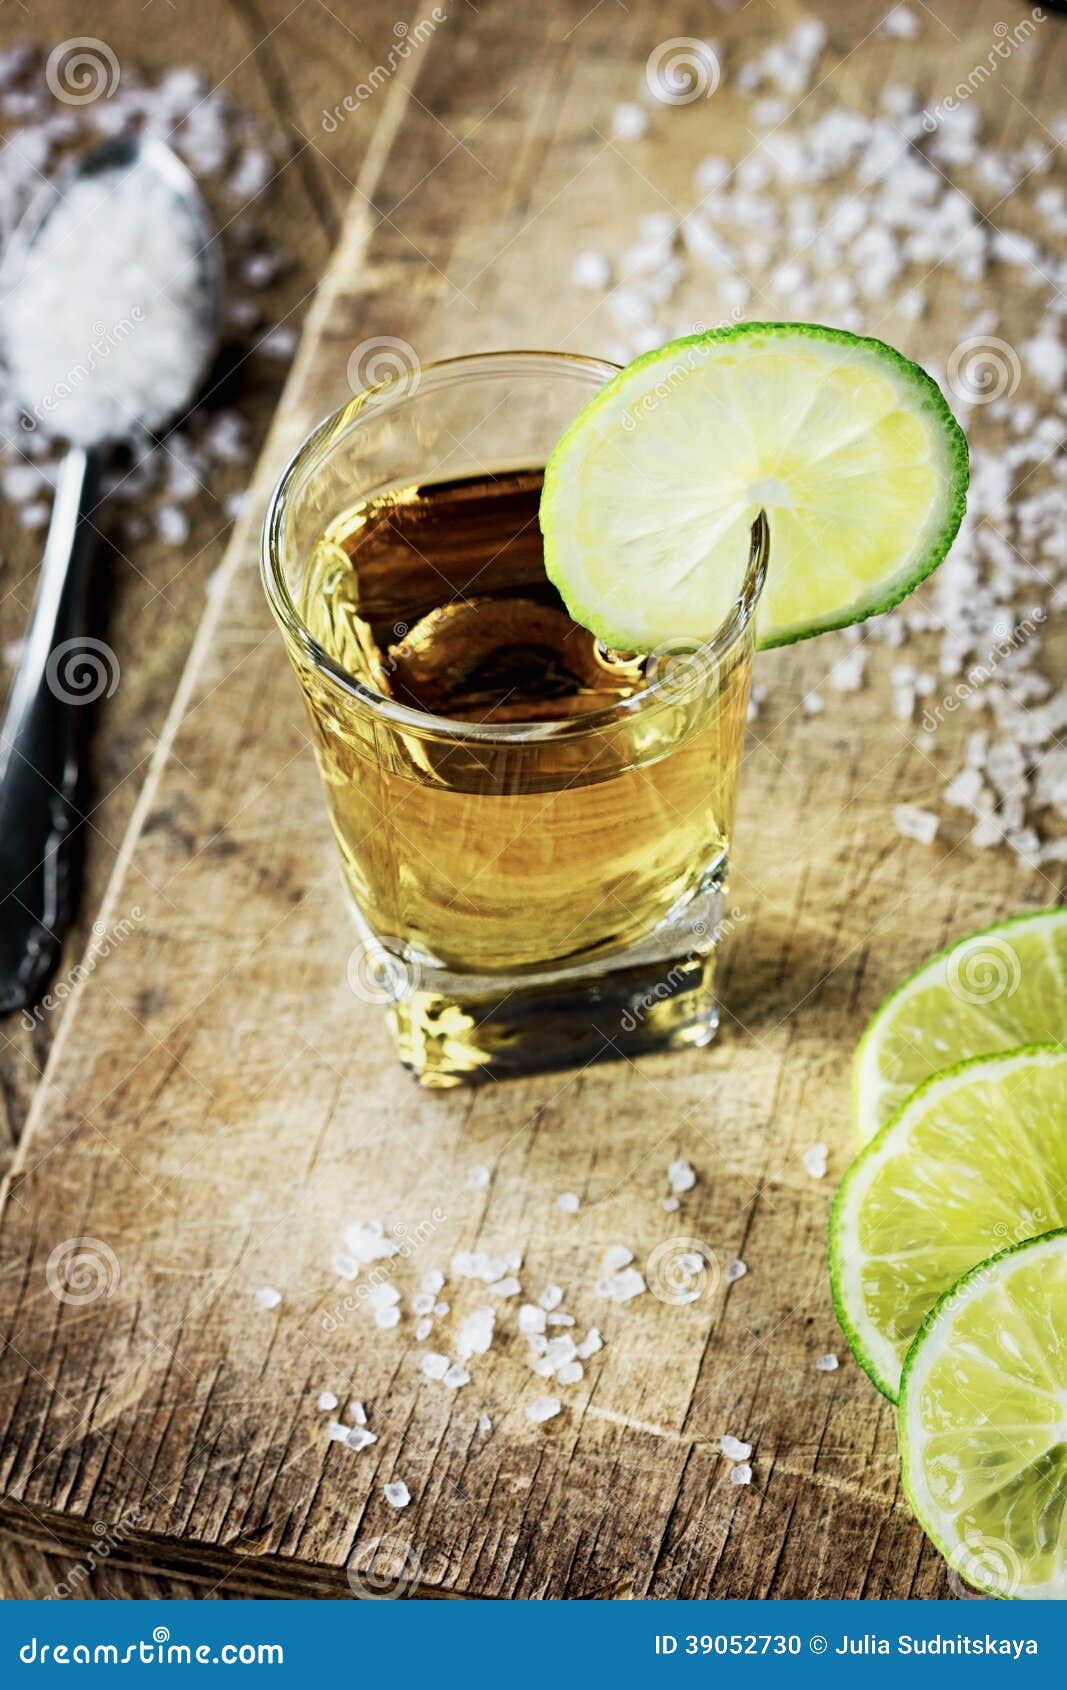 tequila shot with lime and salt